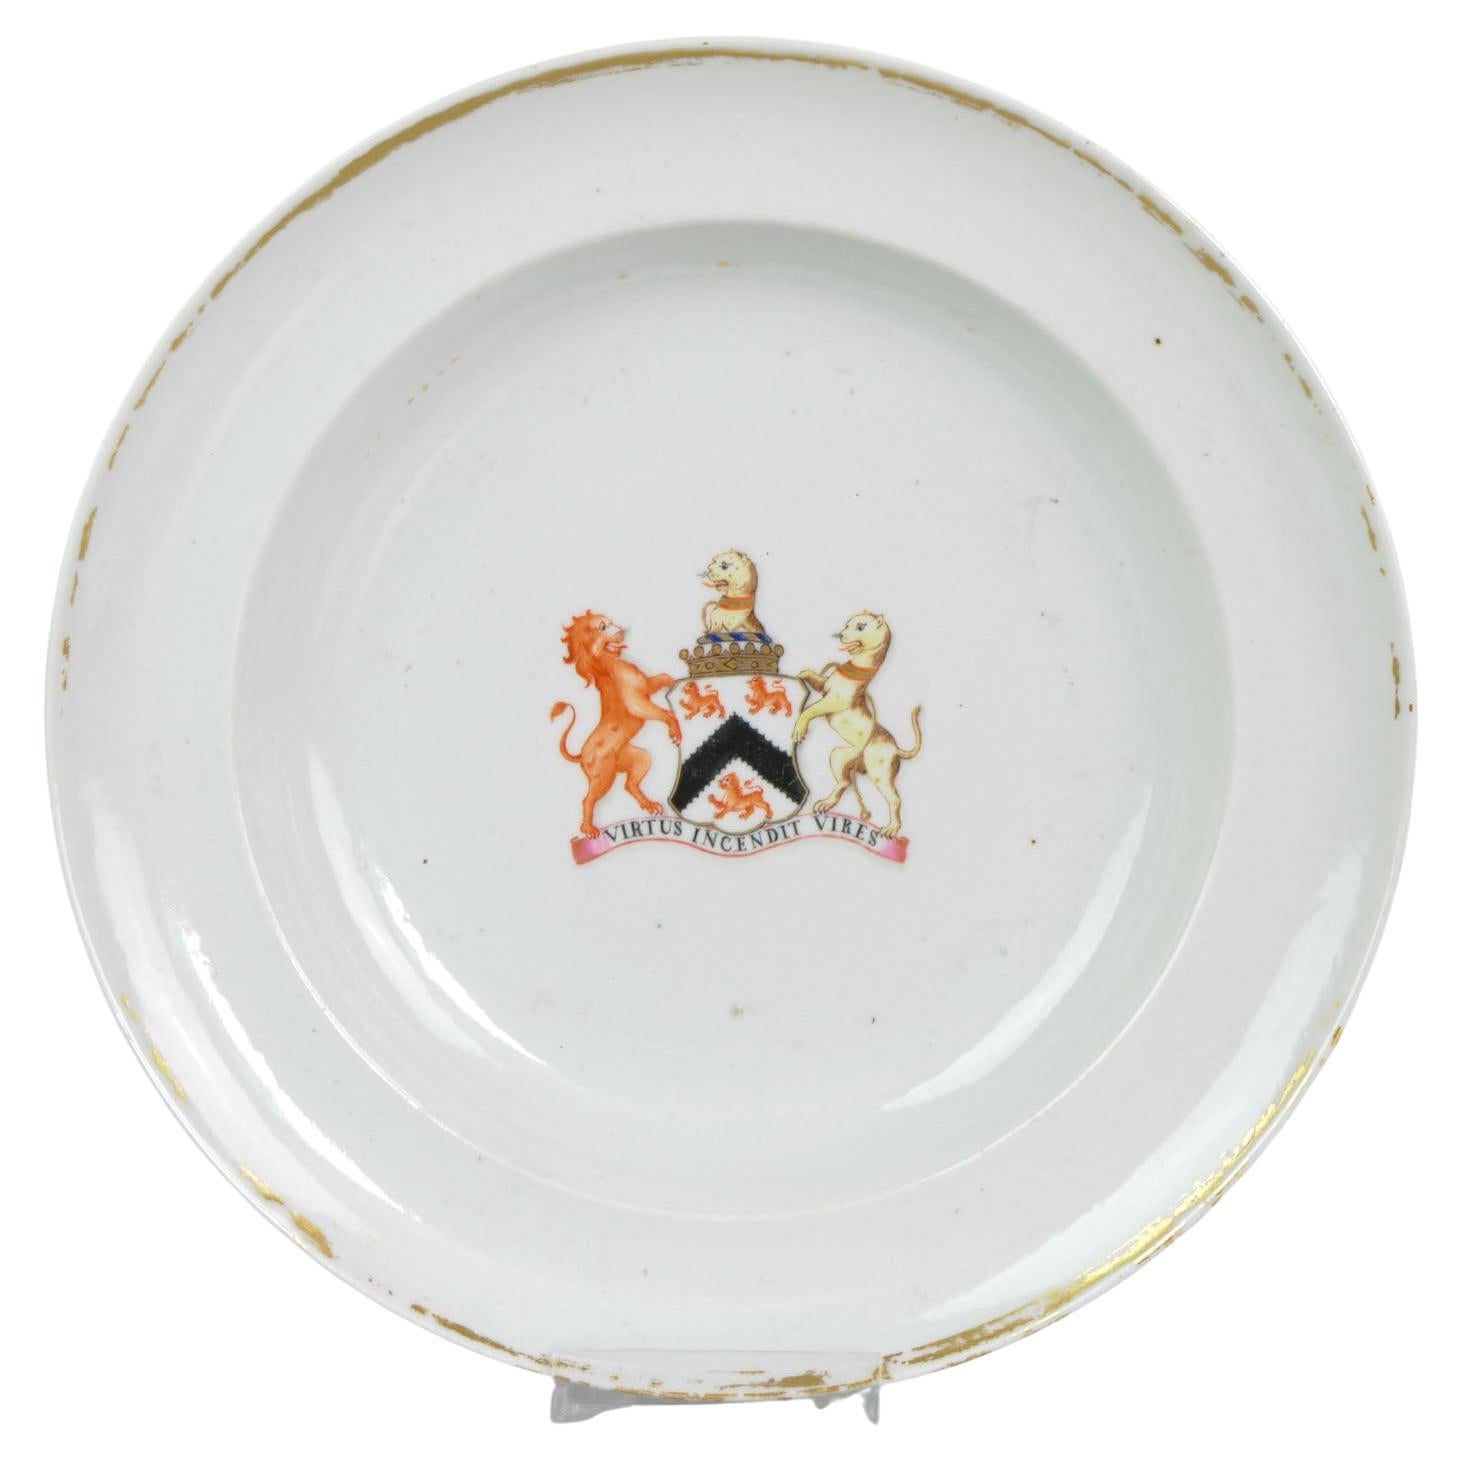 Antique Plate Chinese Porcelain Coat of Arms of Lord Percy Clinton Sydney Smith For Sale